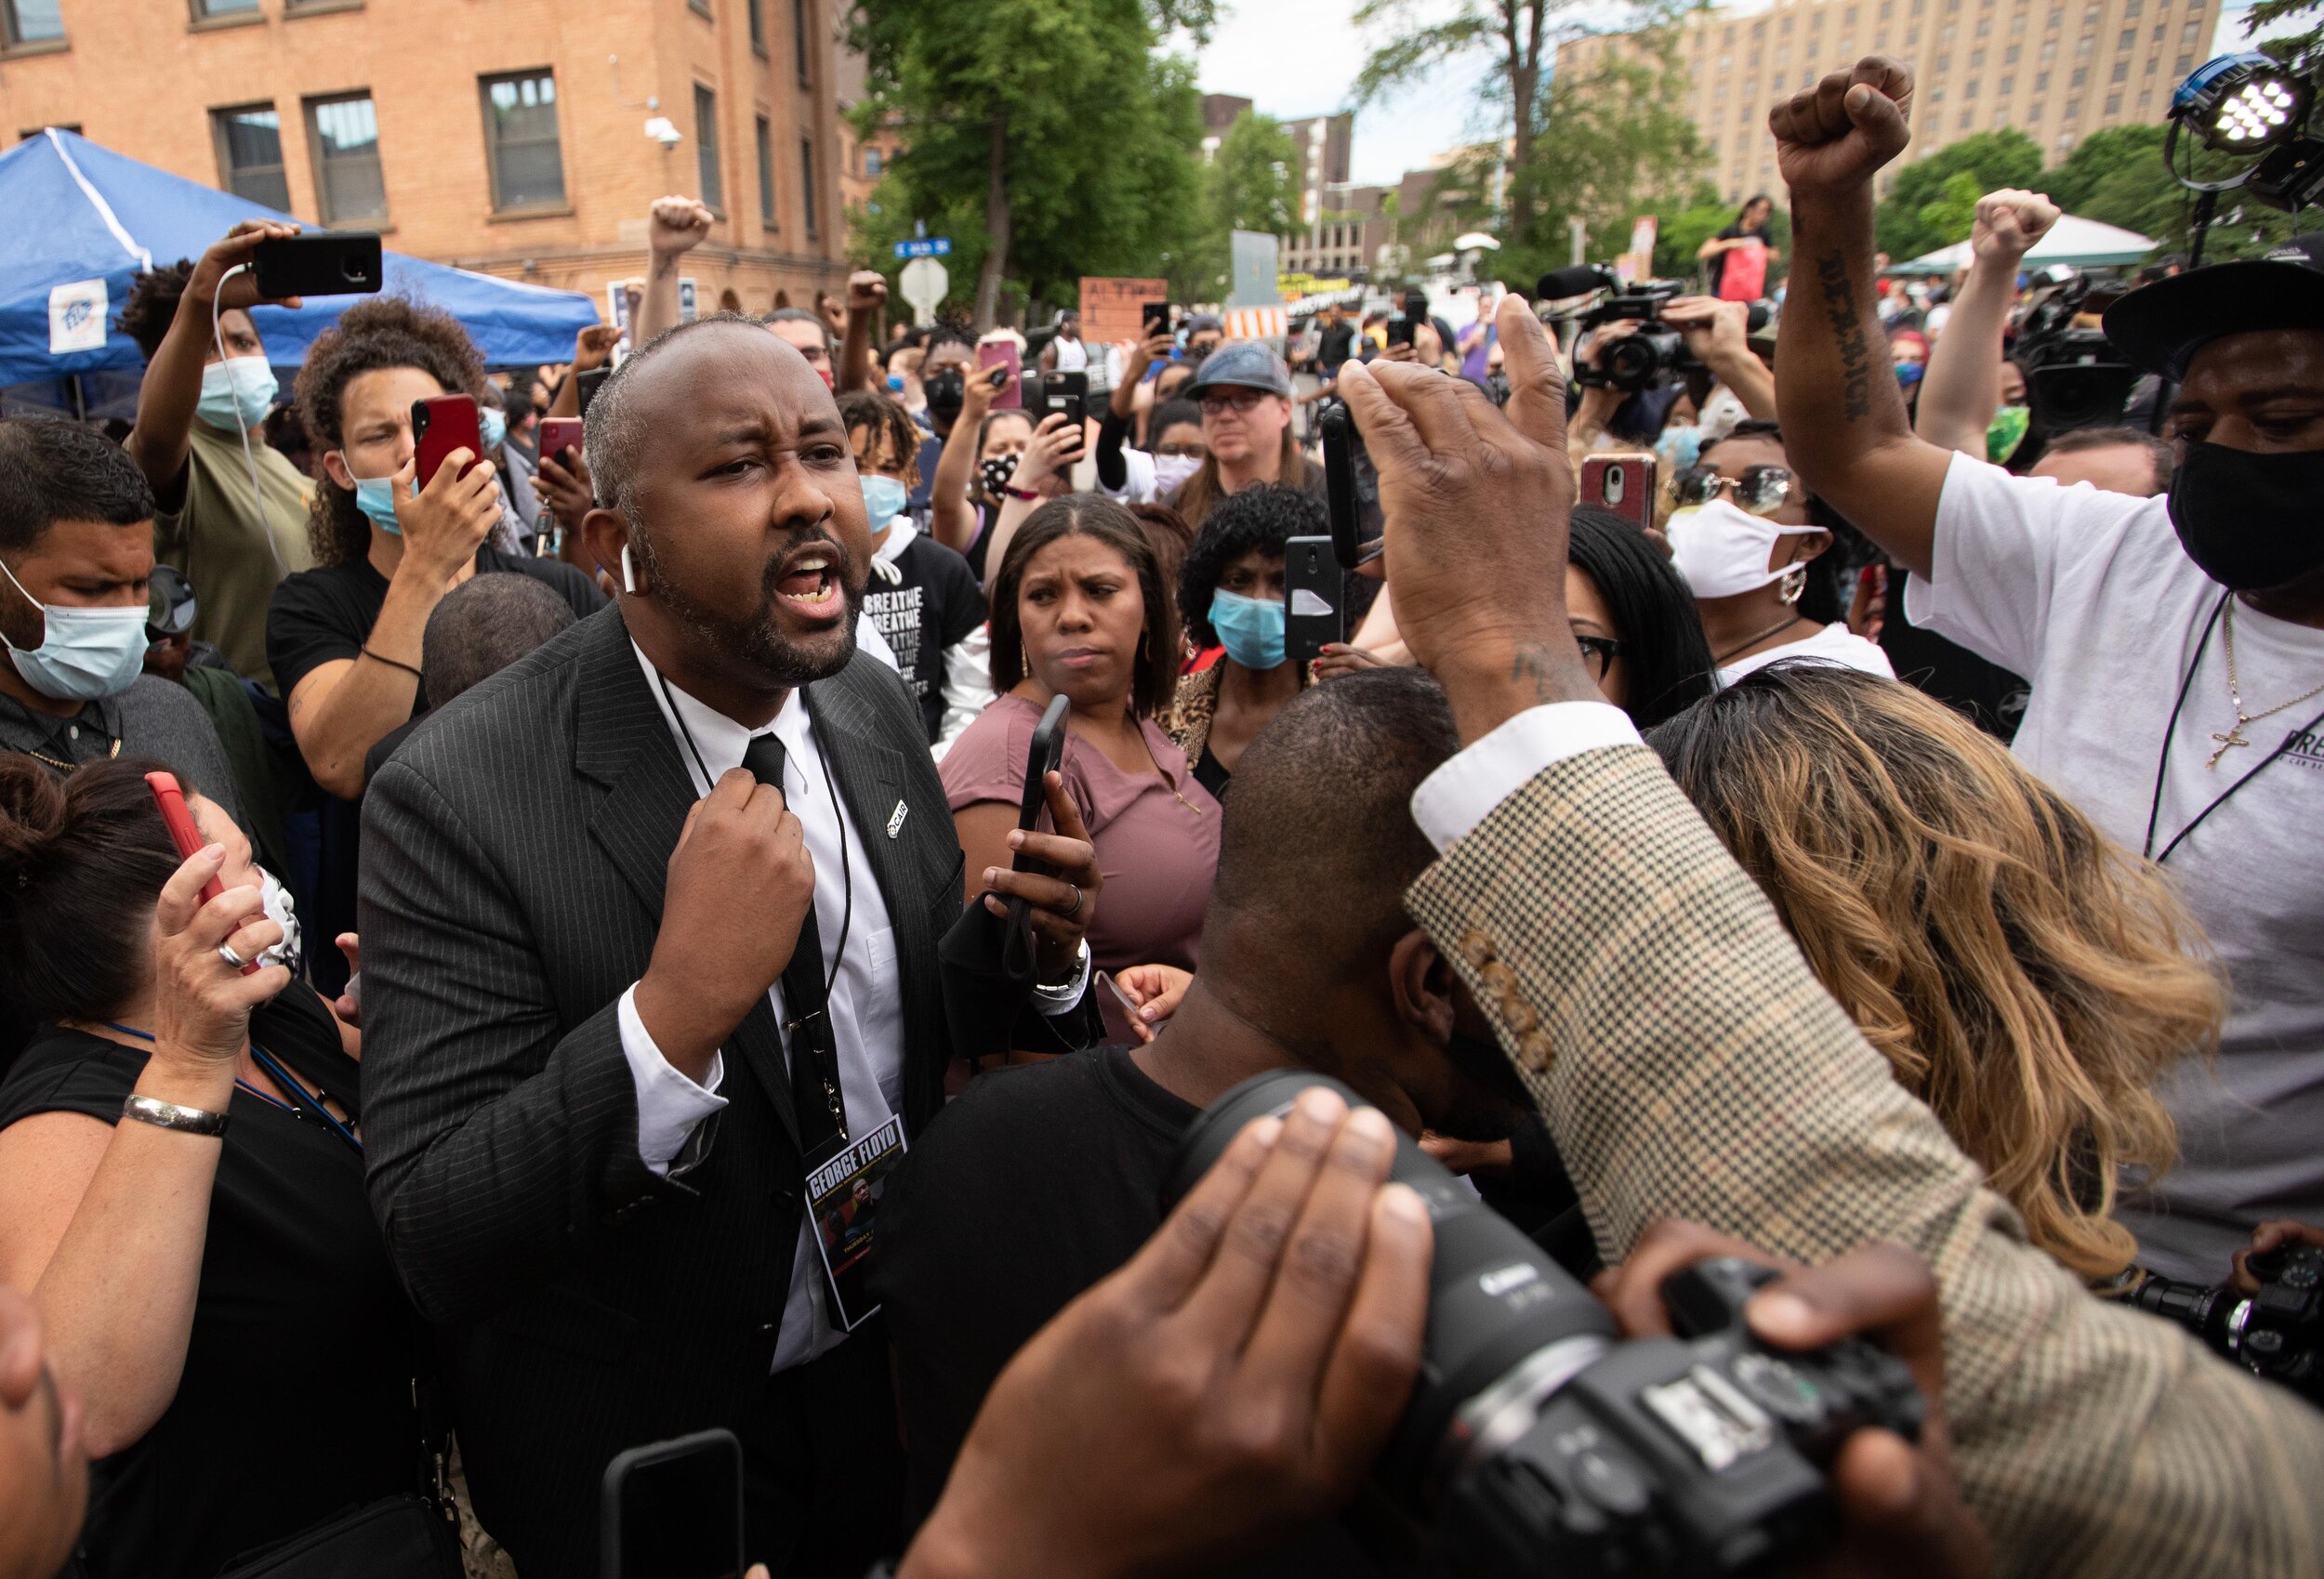  Jaylani Hussein, the currently executive director of the Minnesota chapter of the Council on American-Islamic Relations (CAIR-MN) speaks to the crowd outside of North Central University in Minneapolis, Minnesota after the memorail for George Floyd w